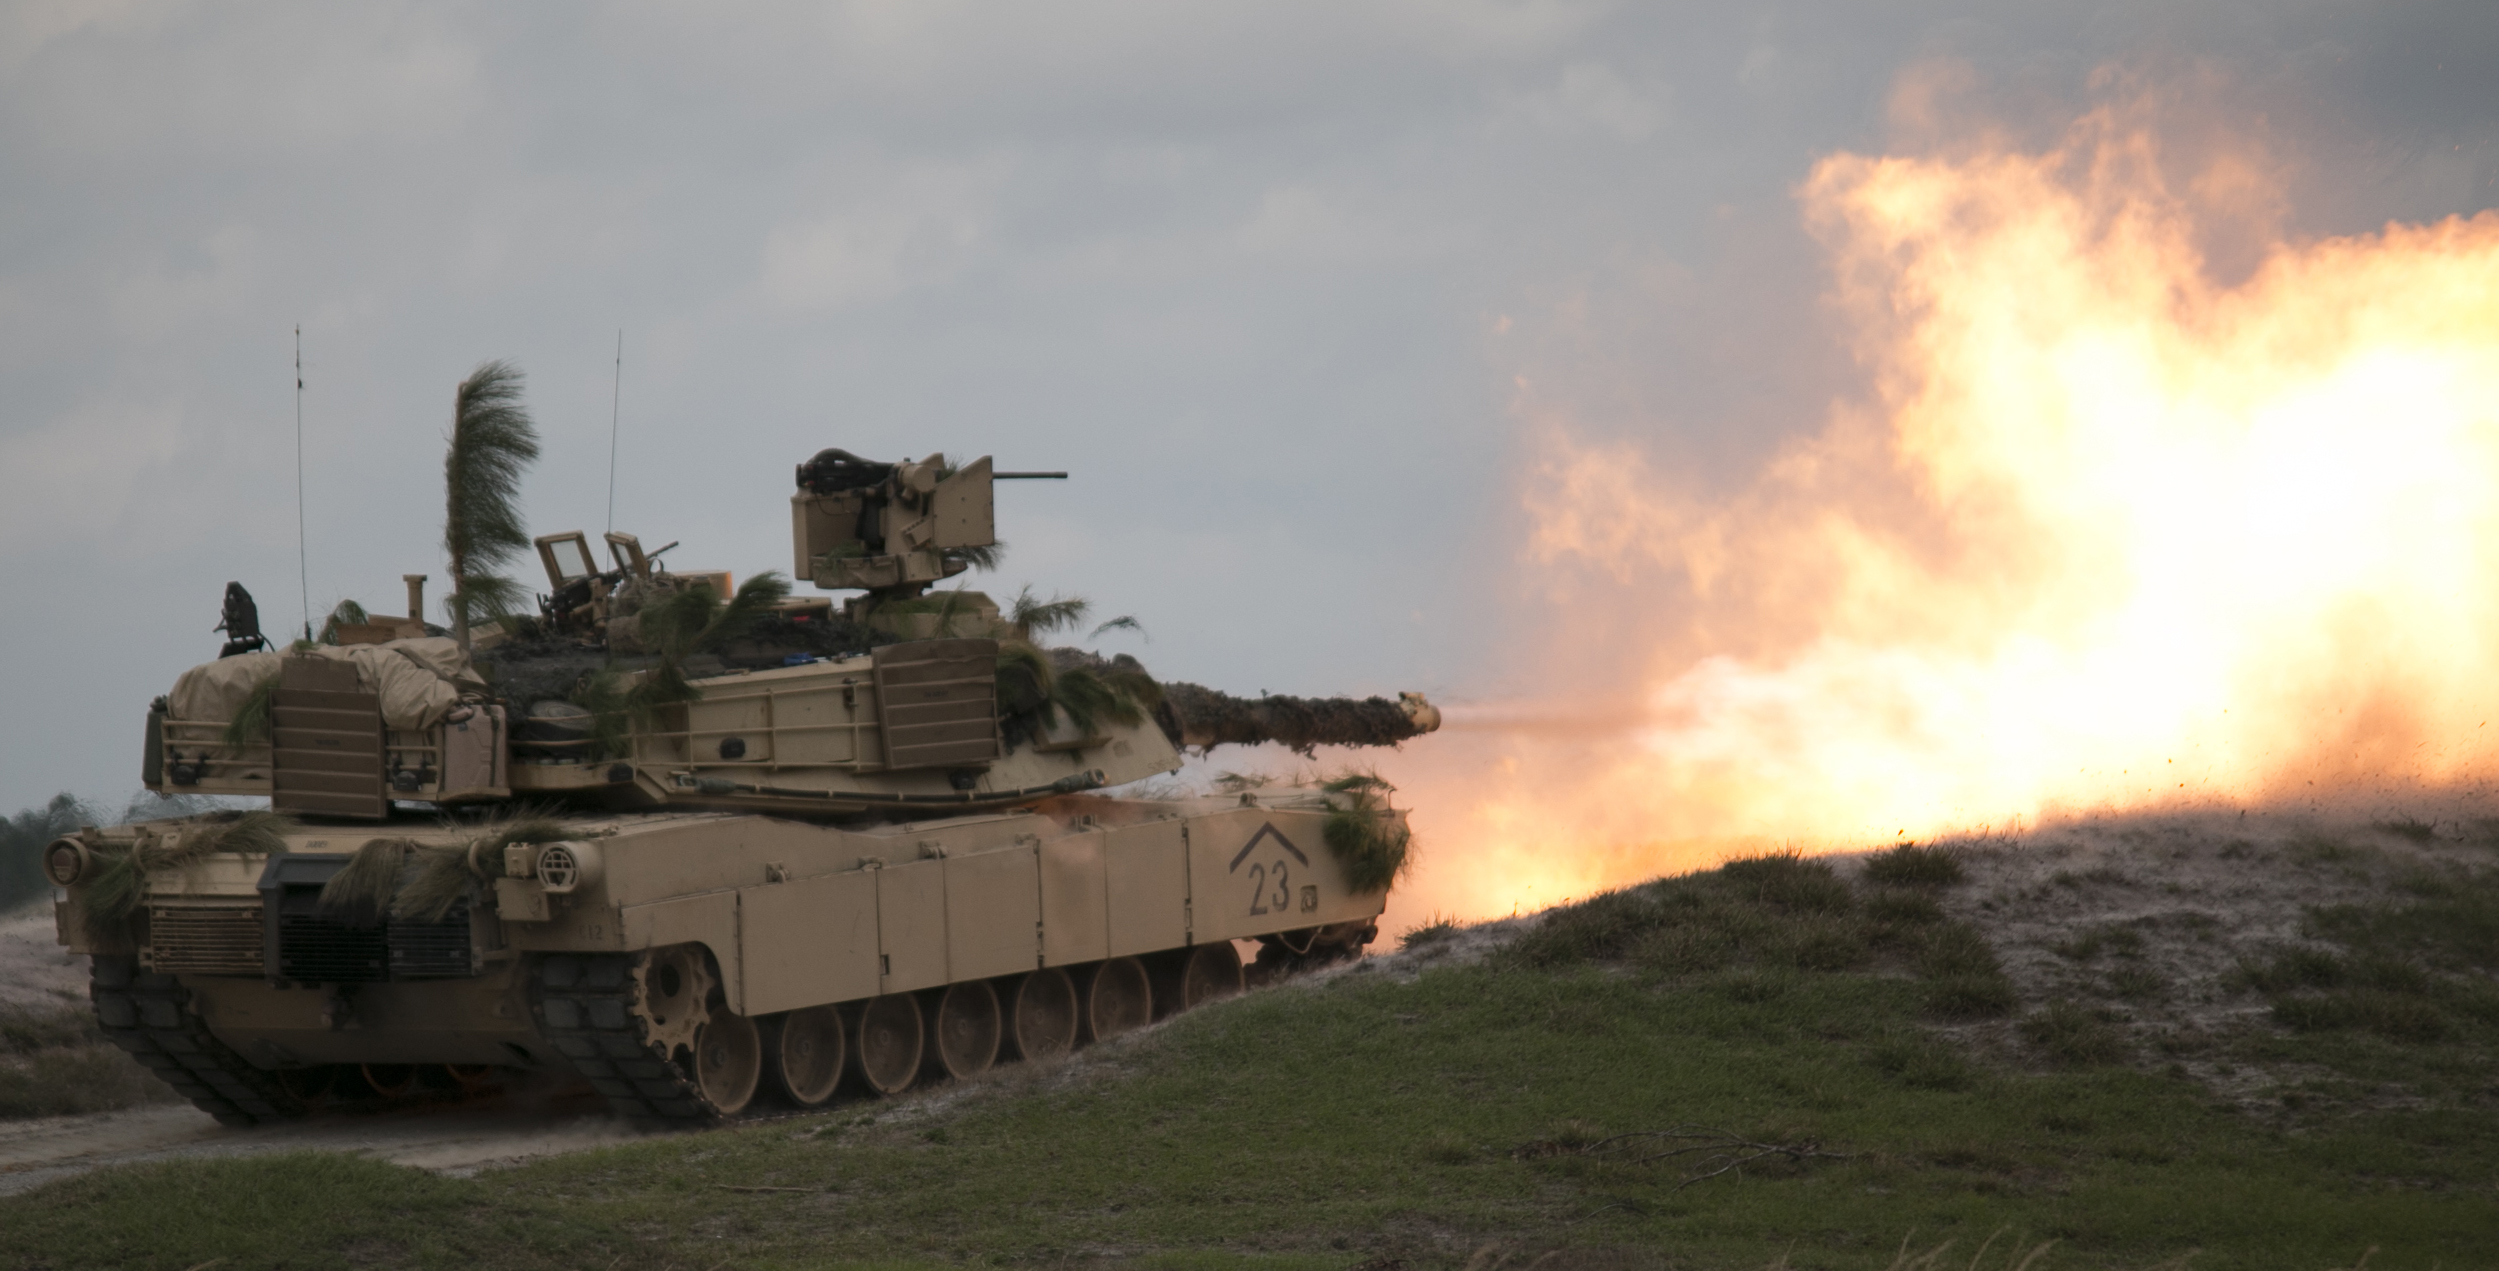  An M1A2 Abrams battle tank fires a 120-mm round downrange Feb. 15, 2017, at Fort Stewart during a combined arms live-fire exercise conducted by the 3rd Infantry Division’s 1st Armored Brigade Combat Team. &nbsp;(Dash Coleman/Savannah Morning News)&n